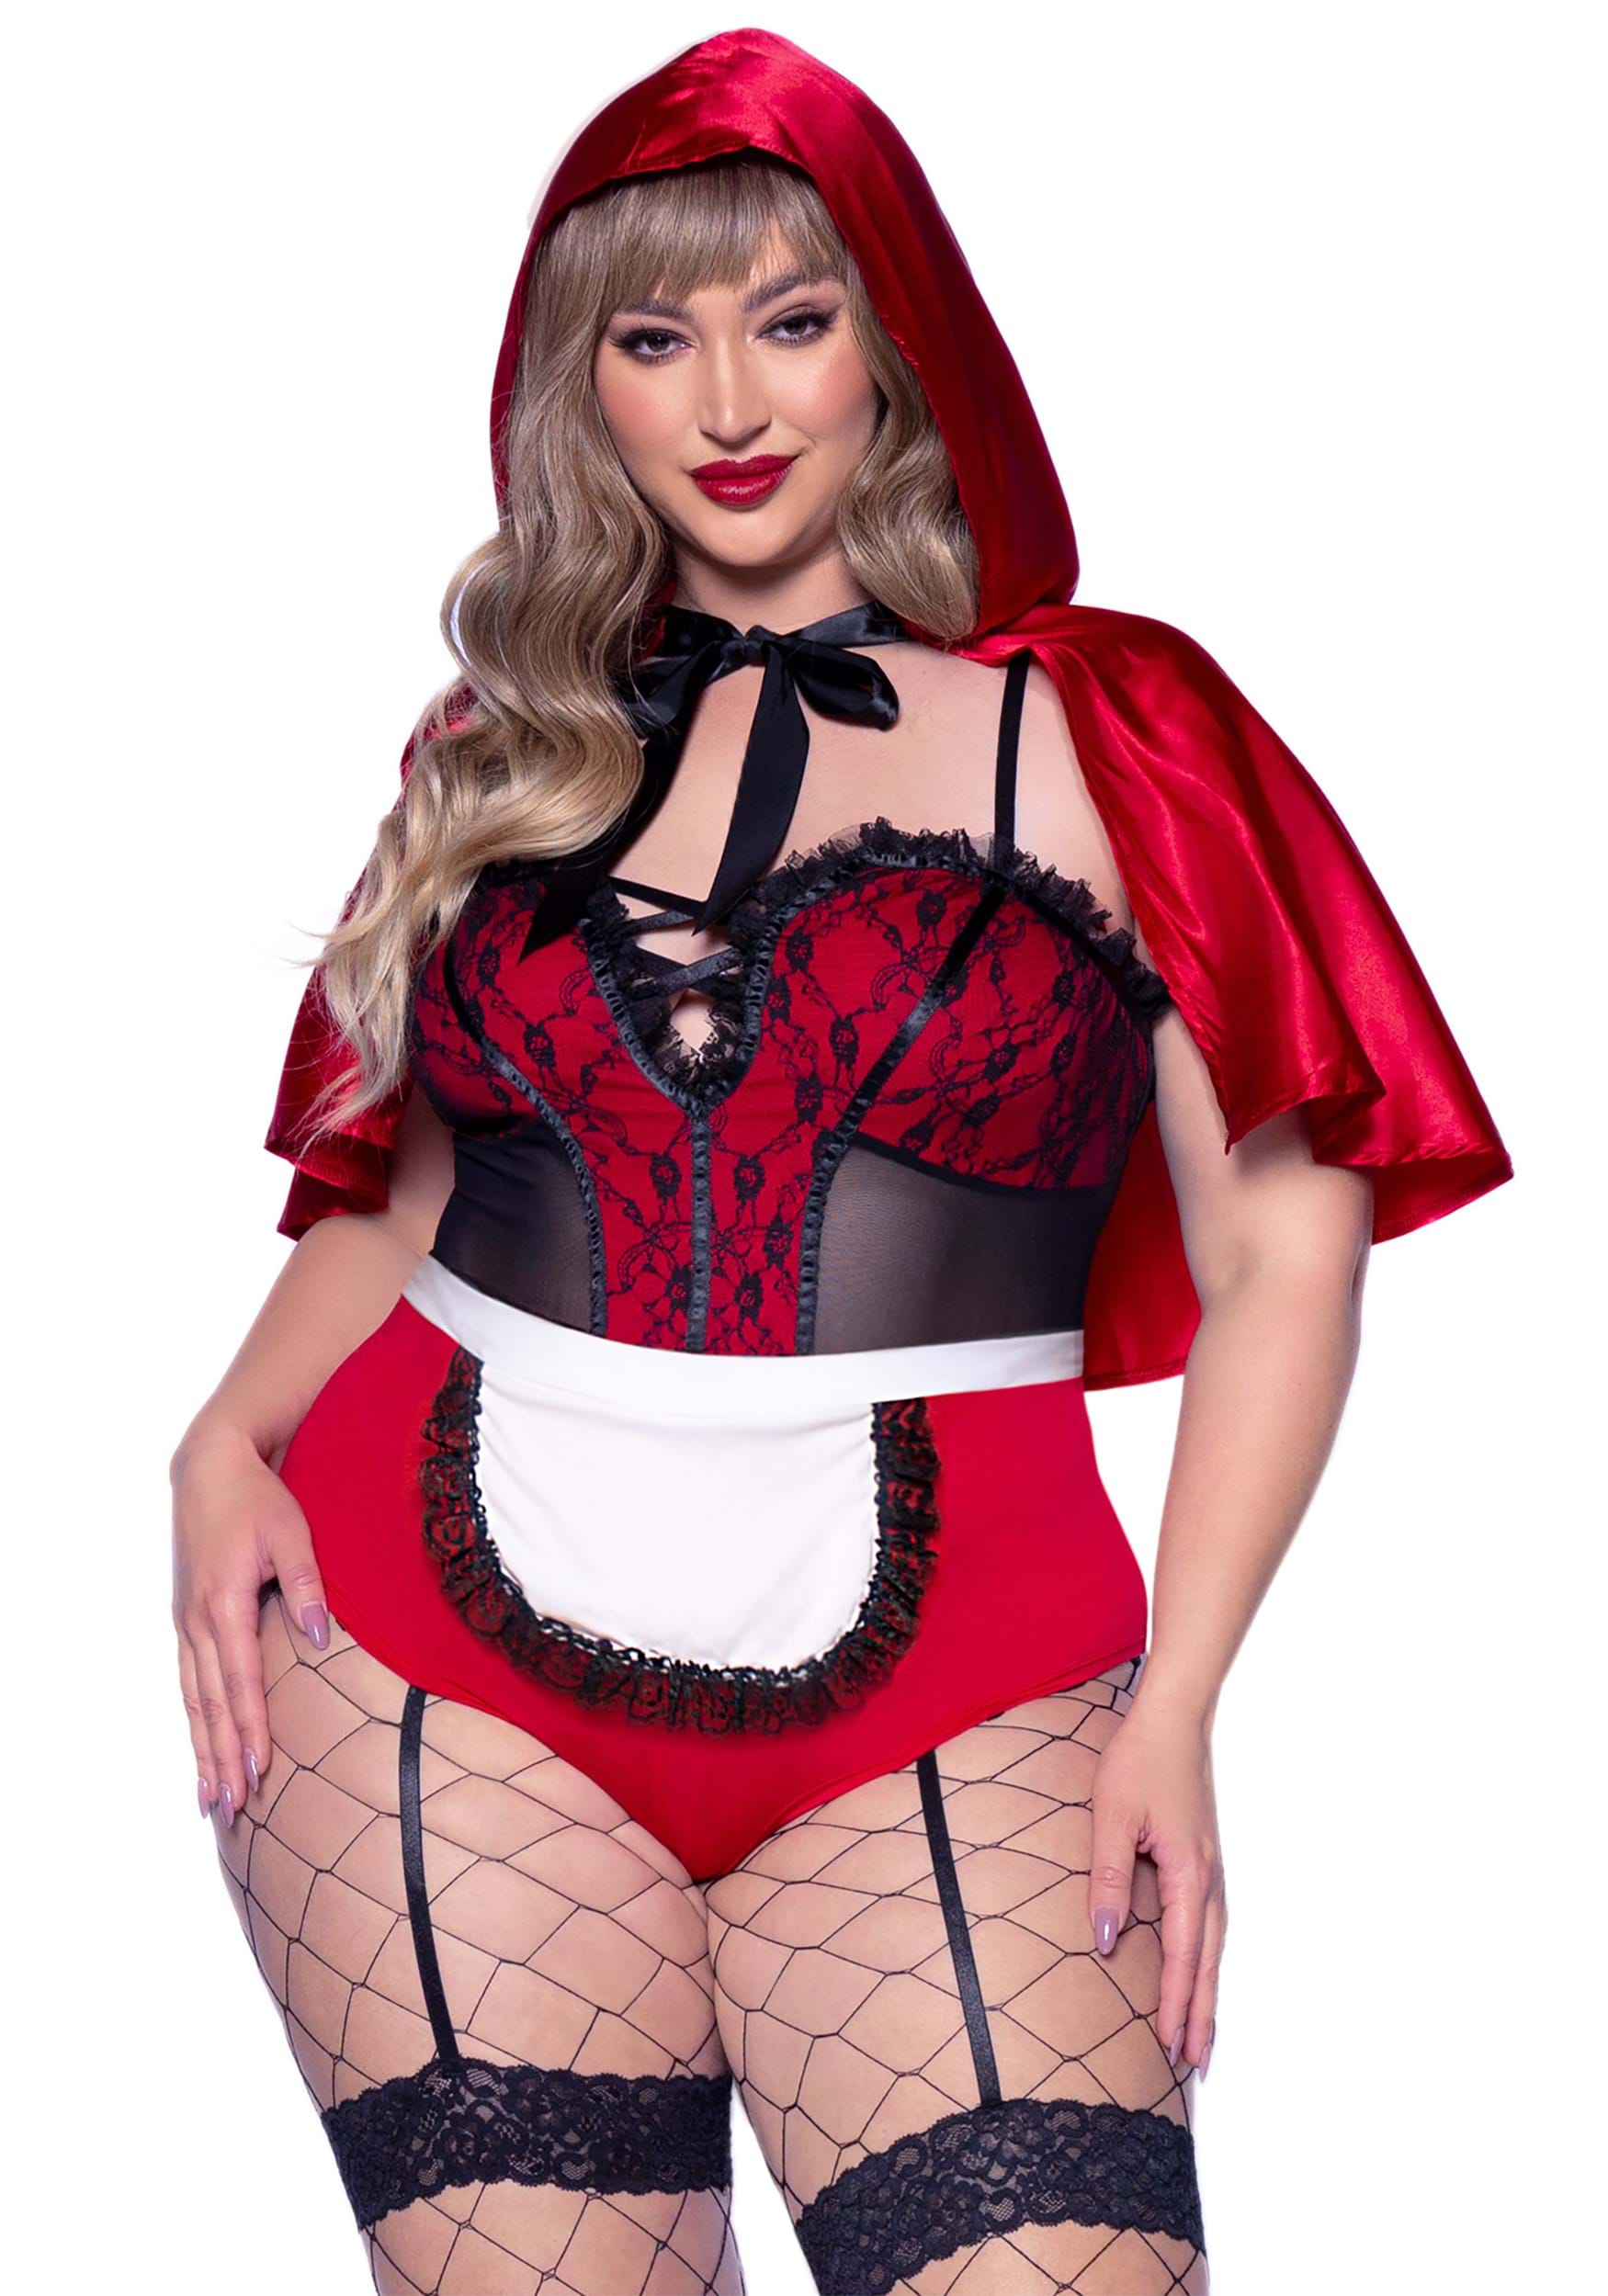 Women’s Plus Size Naughty Miss Red Costume